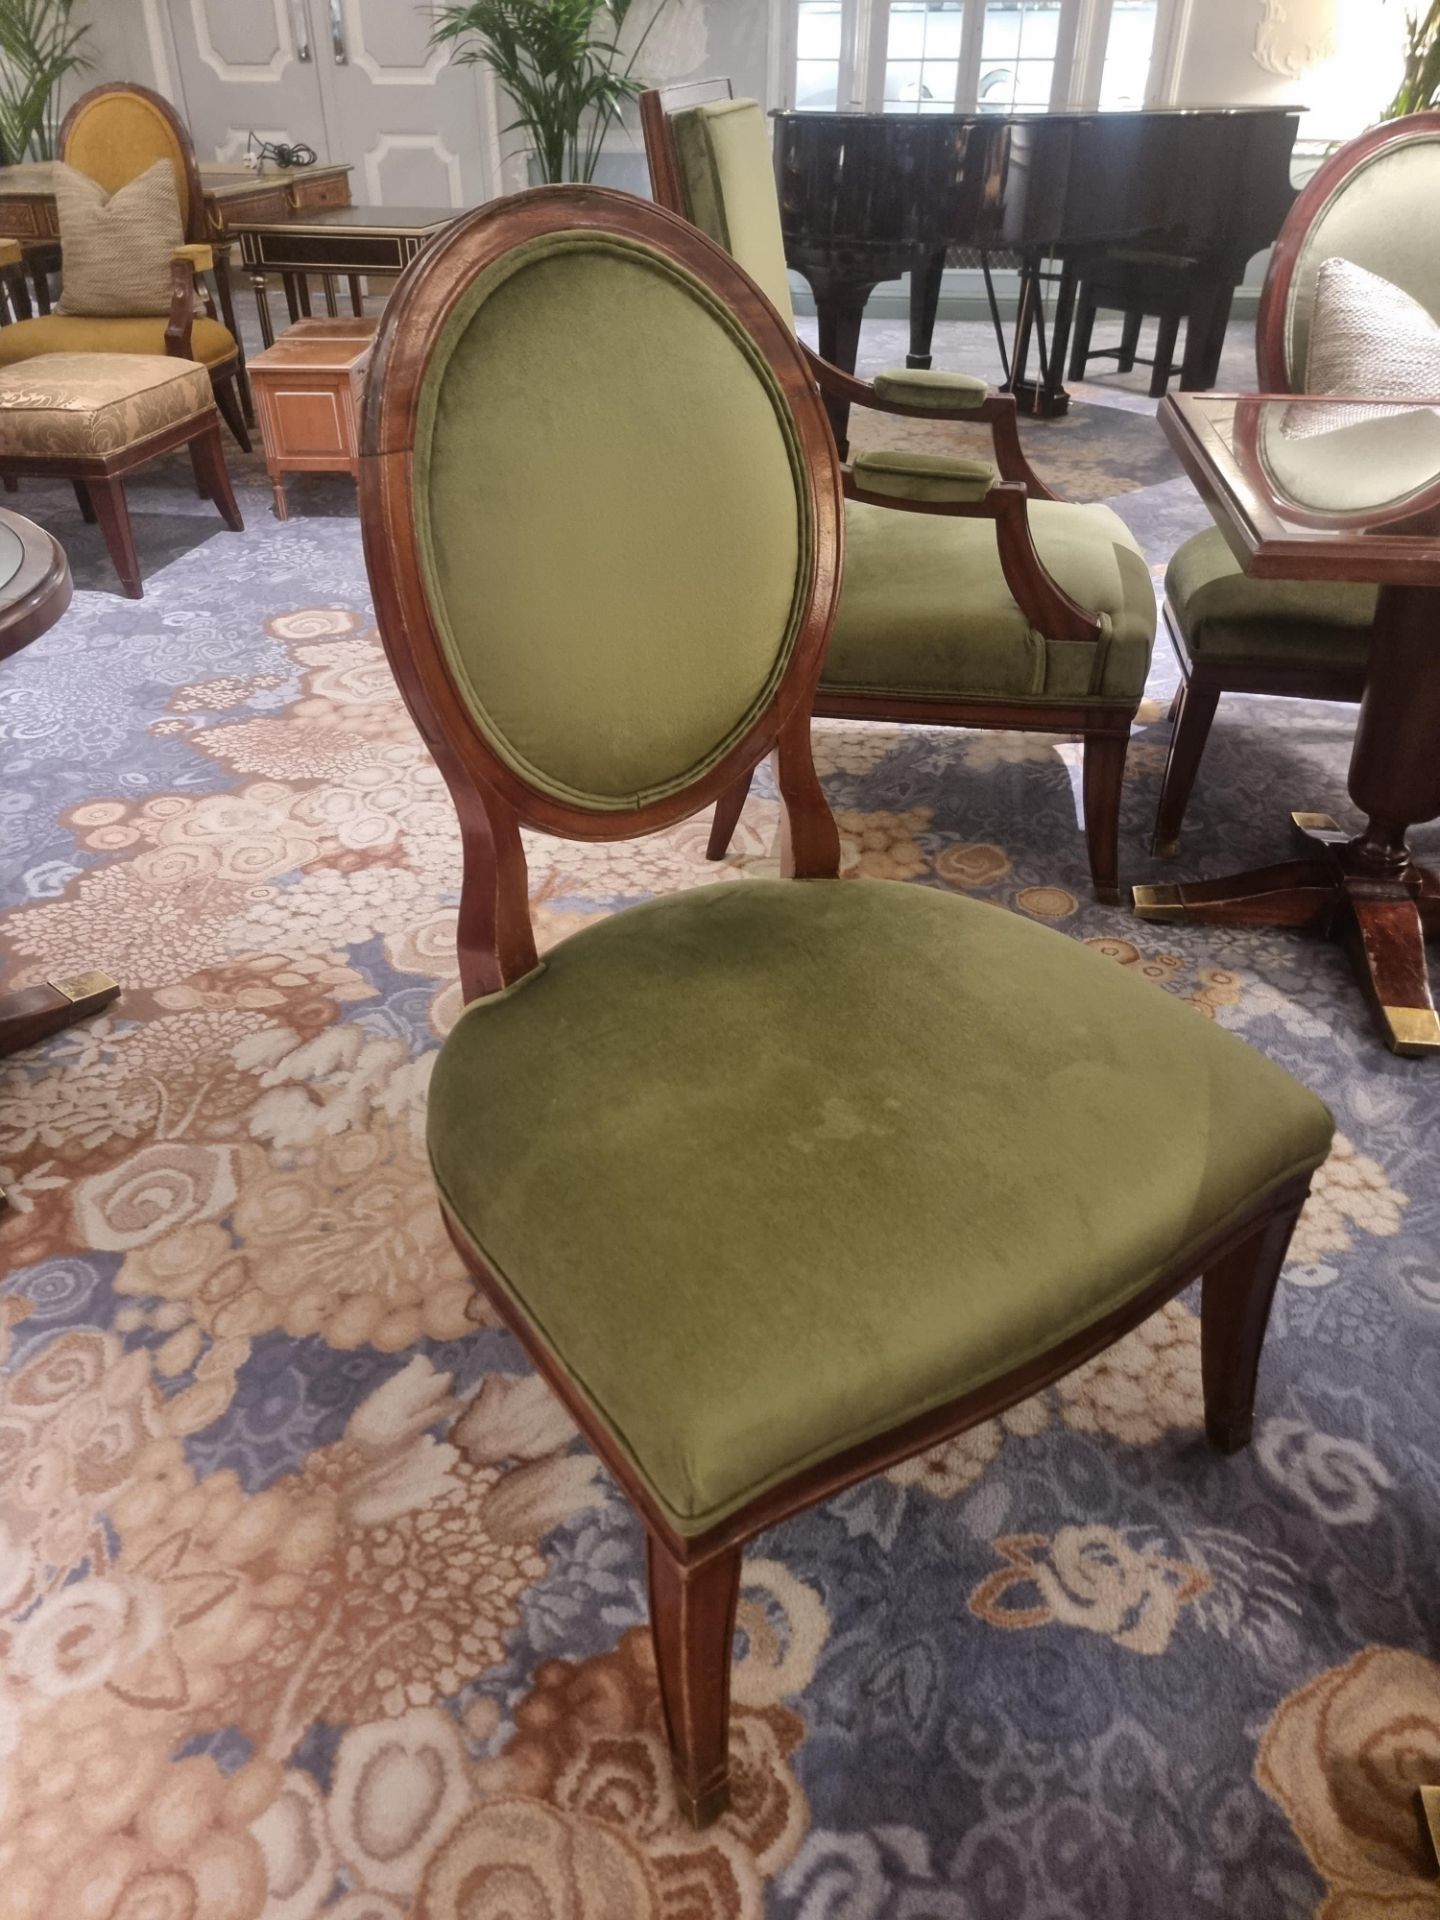 Louis XVI Style Framed And Upholstered Chair In Lelievre Paris Olive Green Salon Chair 68 x 68 x - Image 2 of 3